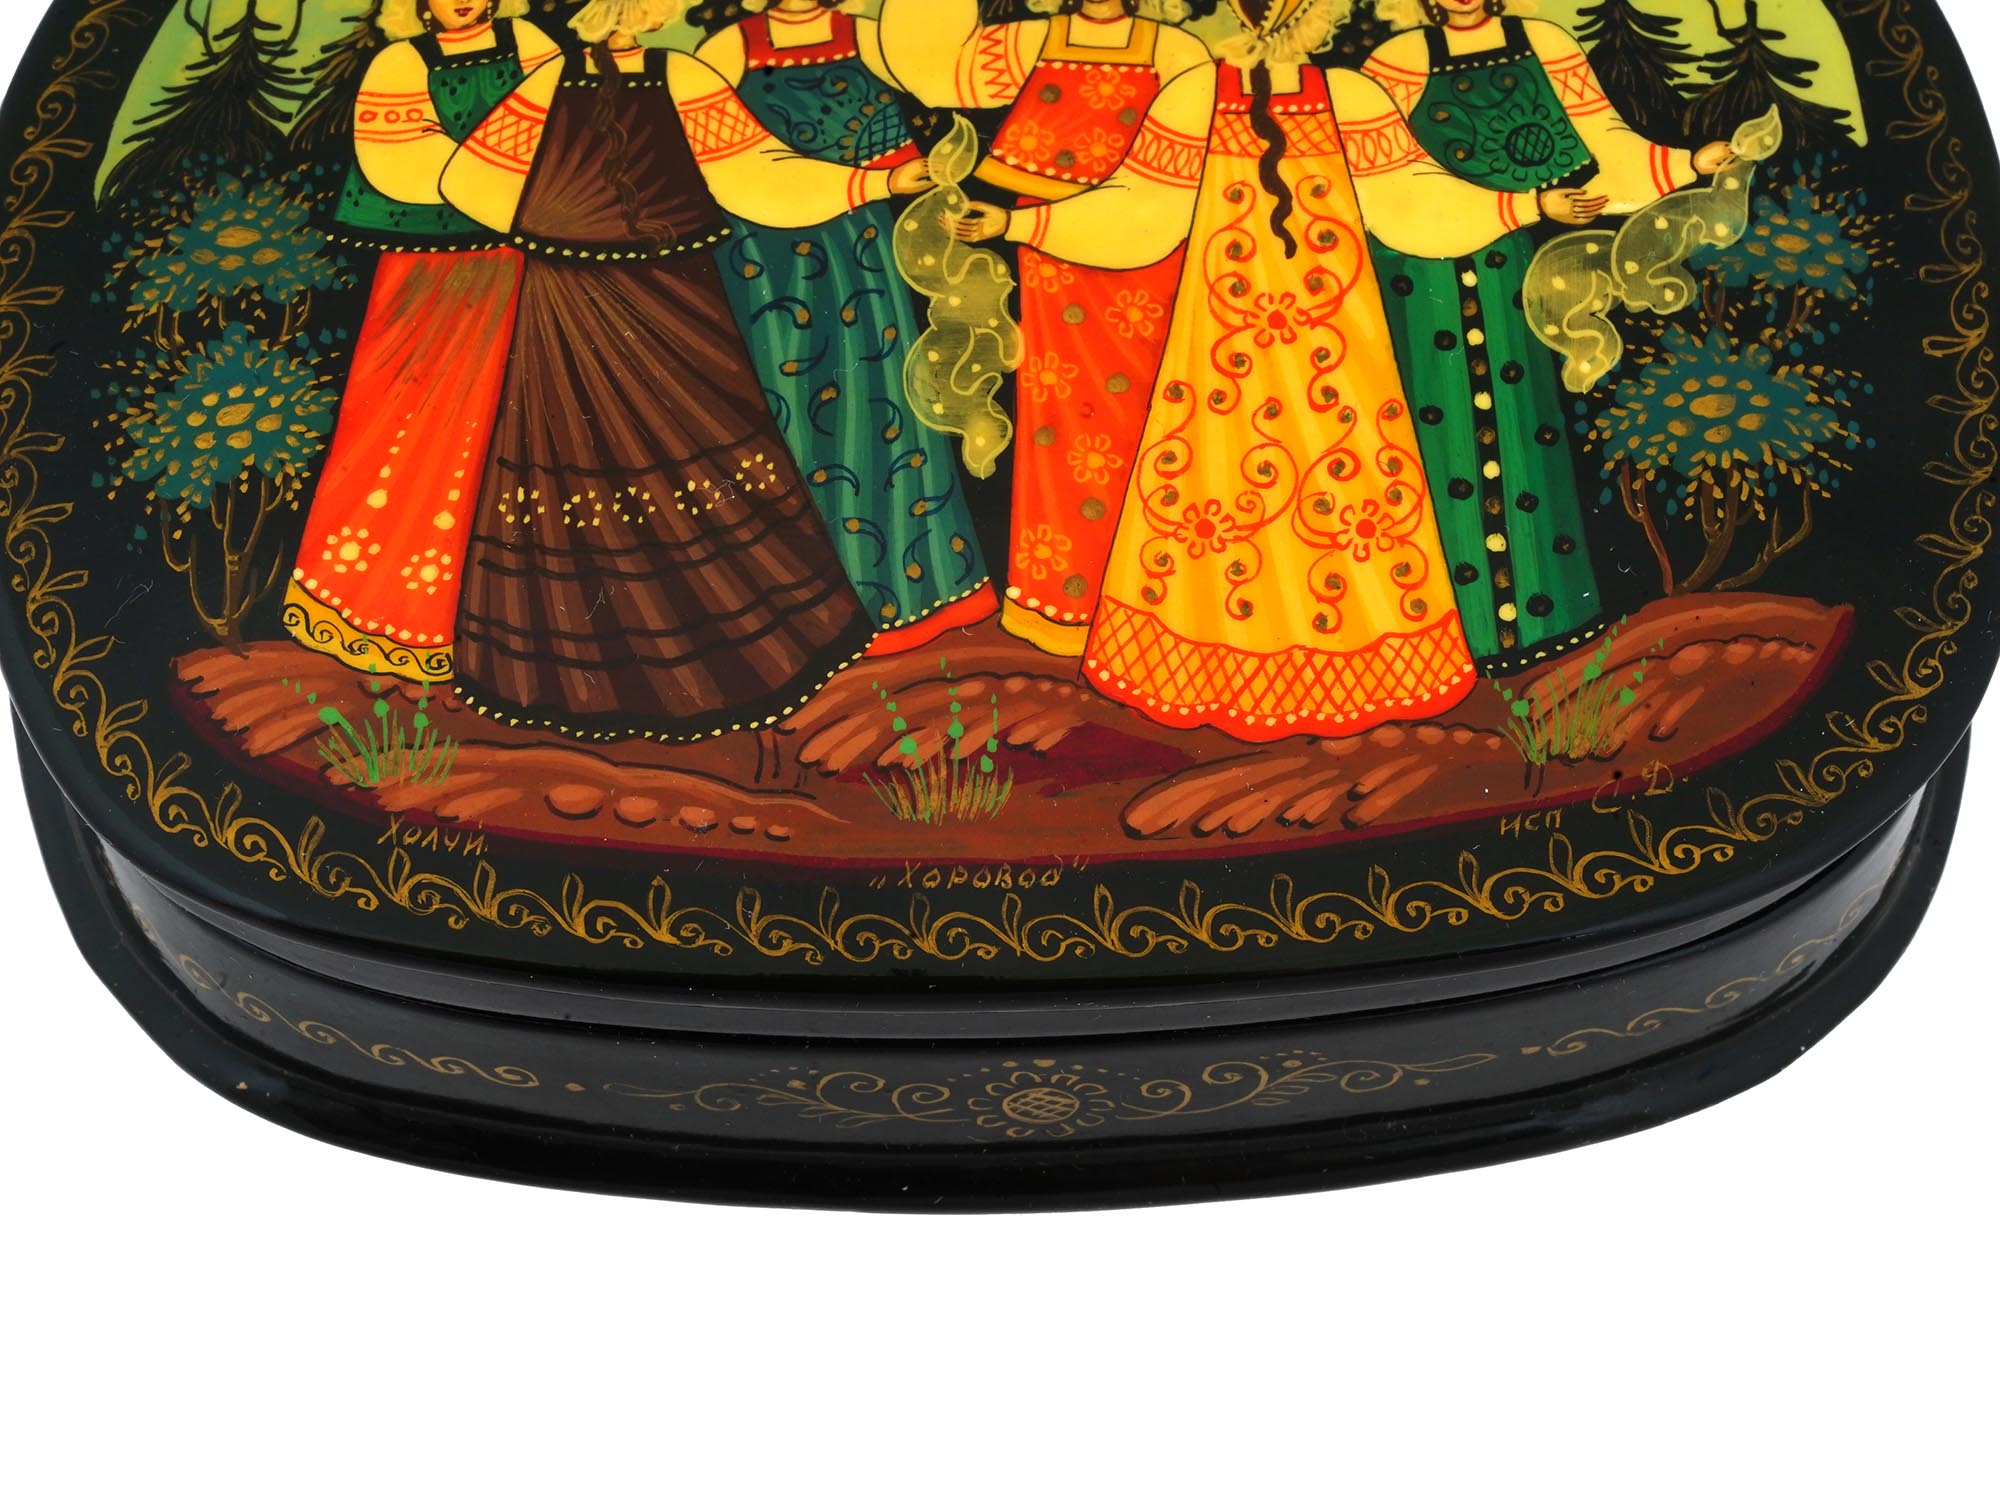 RUSSIAN TRADITIONAL LACQUERED KHOLUI TRINKET BOX PIC-4